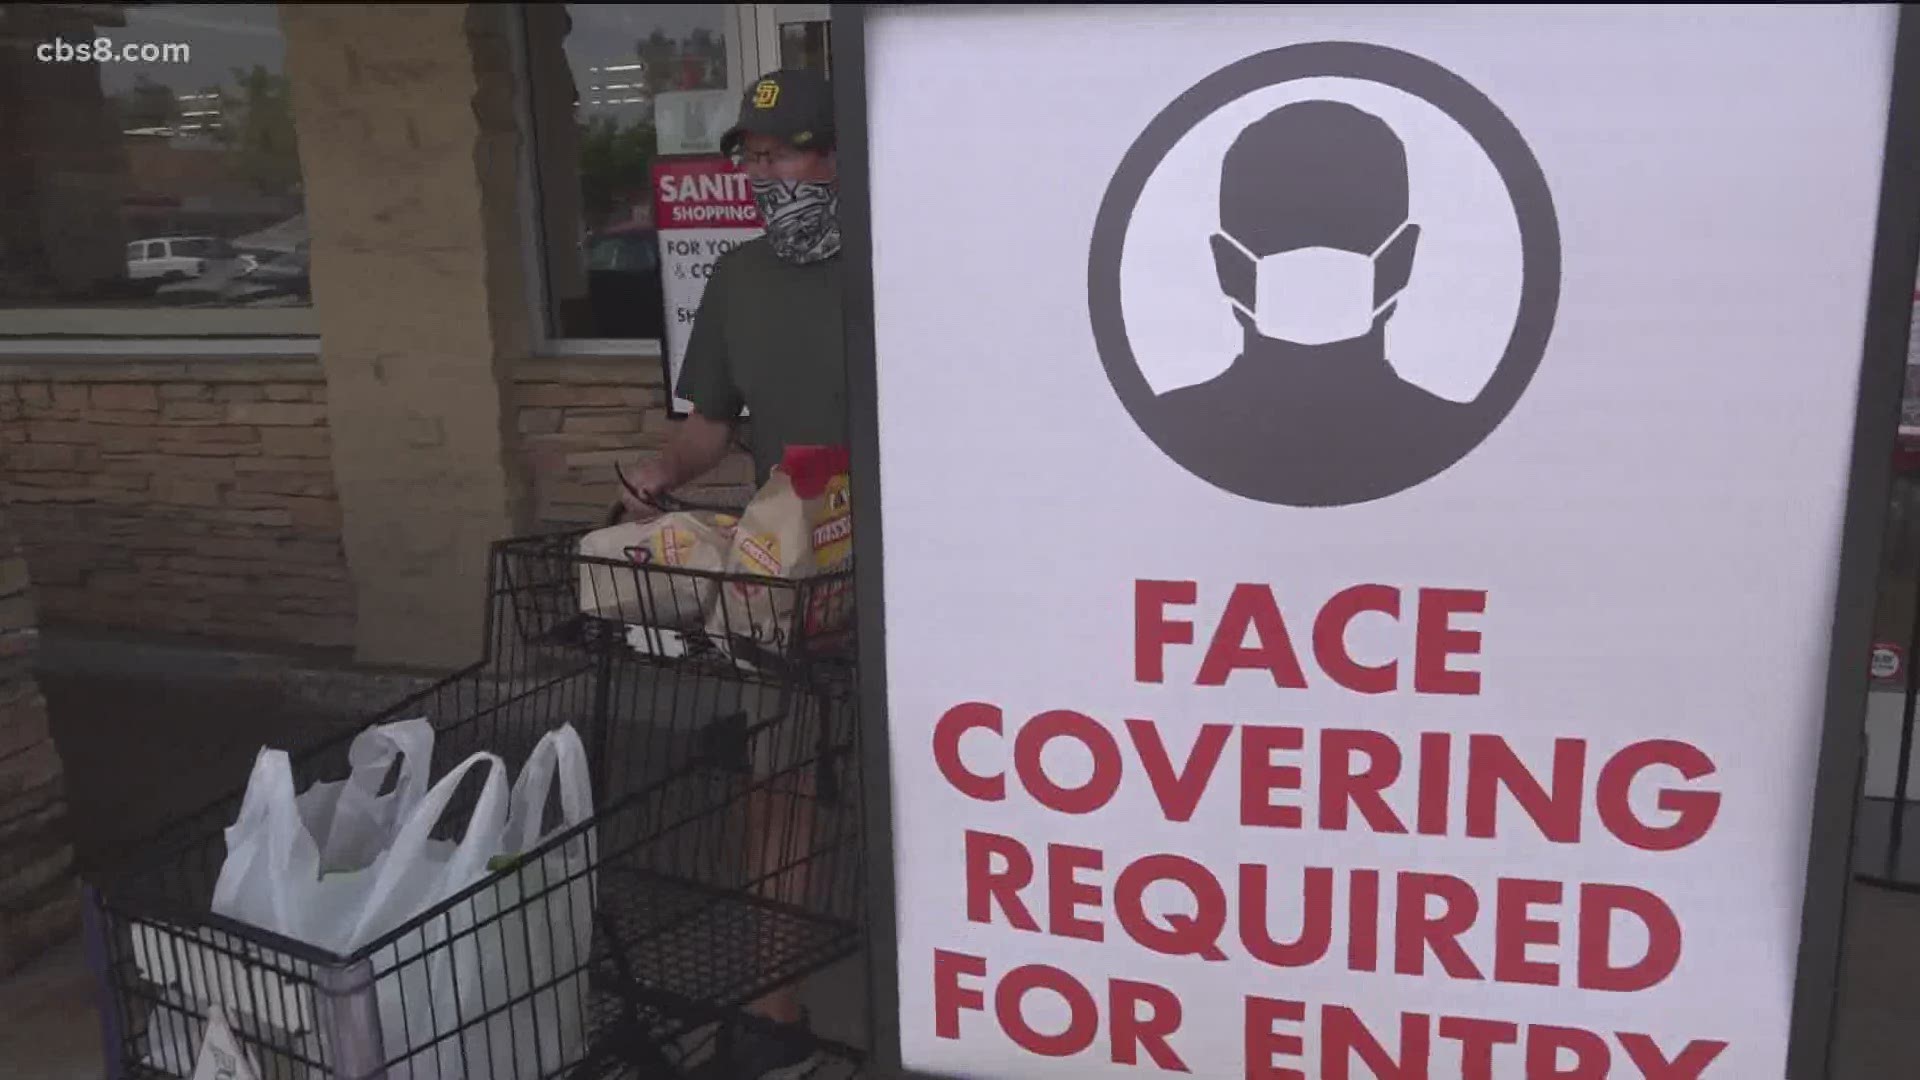 Beginning May 1, all San Diego County residents will be required to wear cloth face coverings in public when within 6 feet of another person.